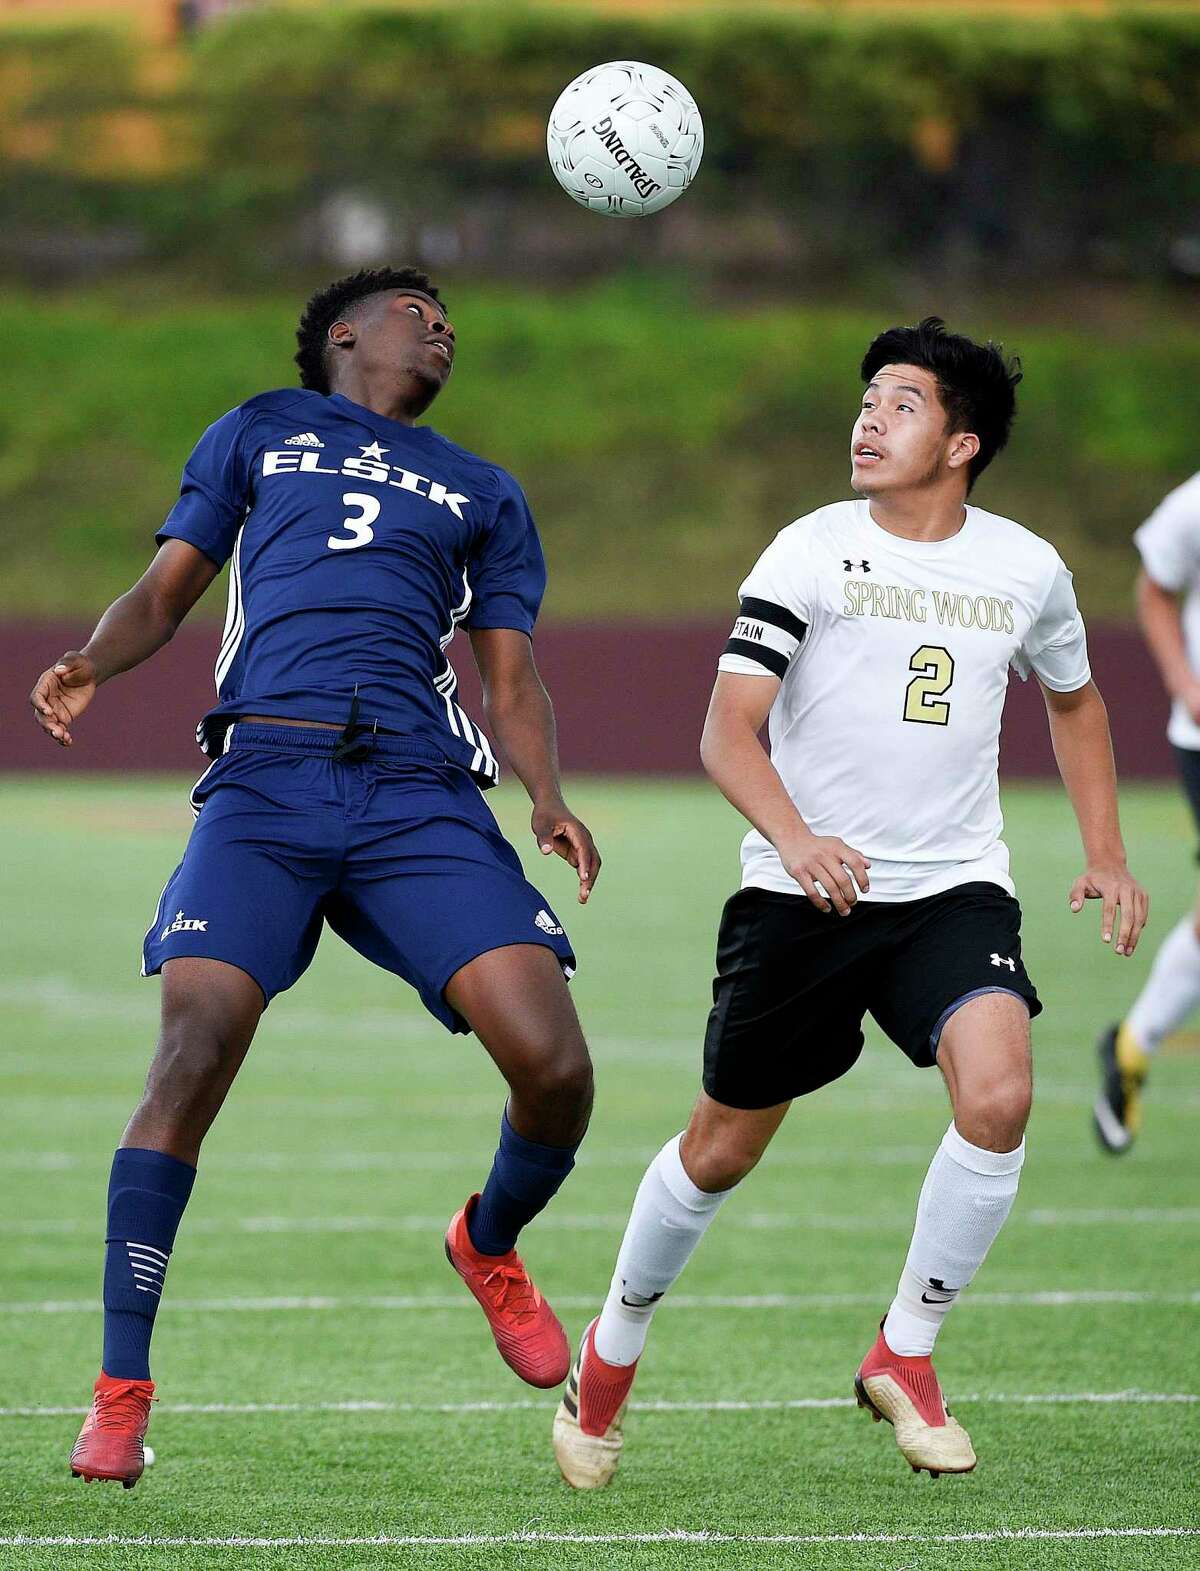 Elsik defender Samuel Nseng (3) heads the ball as Spring Woods defender Walter Constanza defends during the first half of a 6A region 3 final high school soccer match, Saturday, April 13, 2019, in Deer Park.